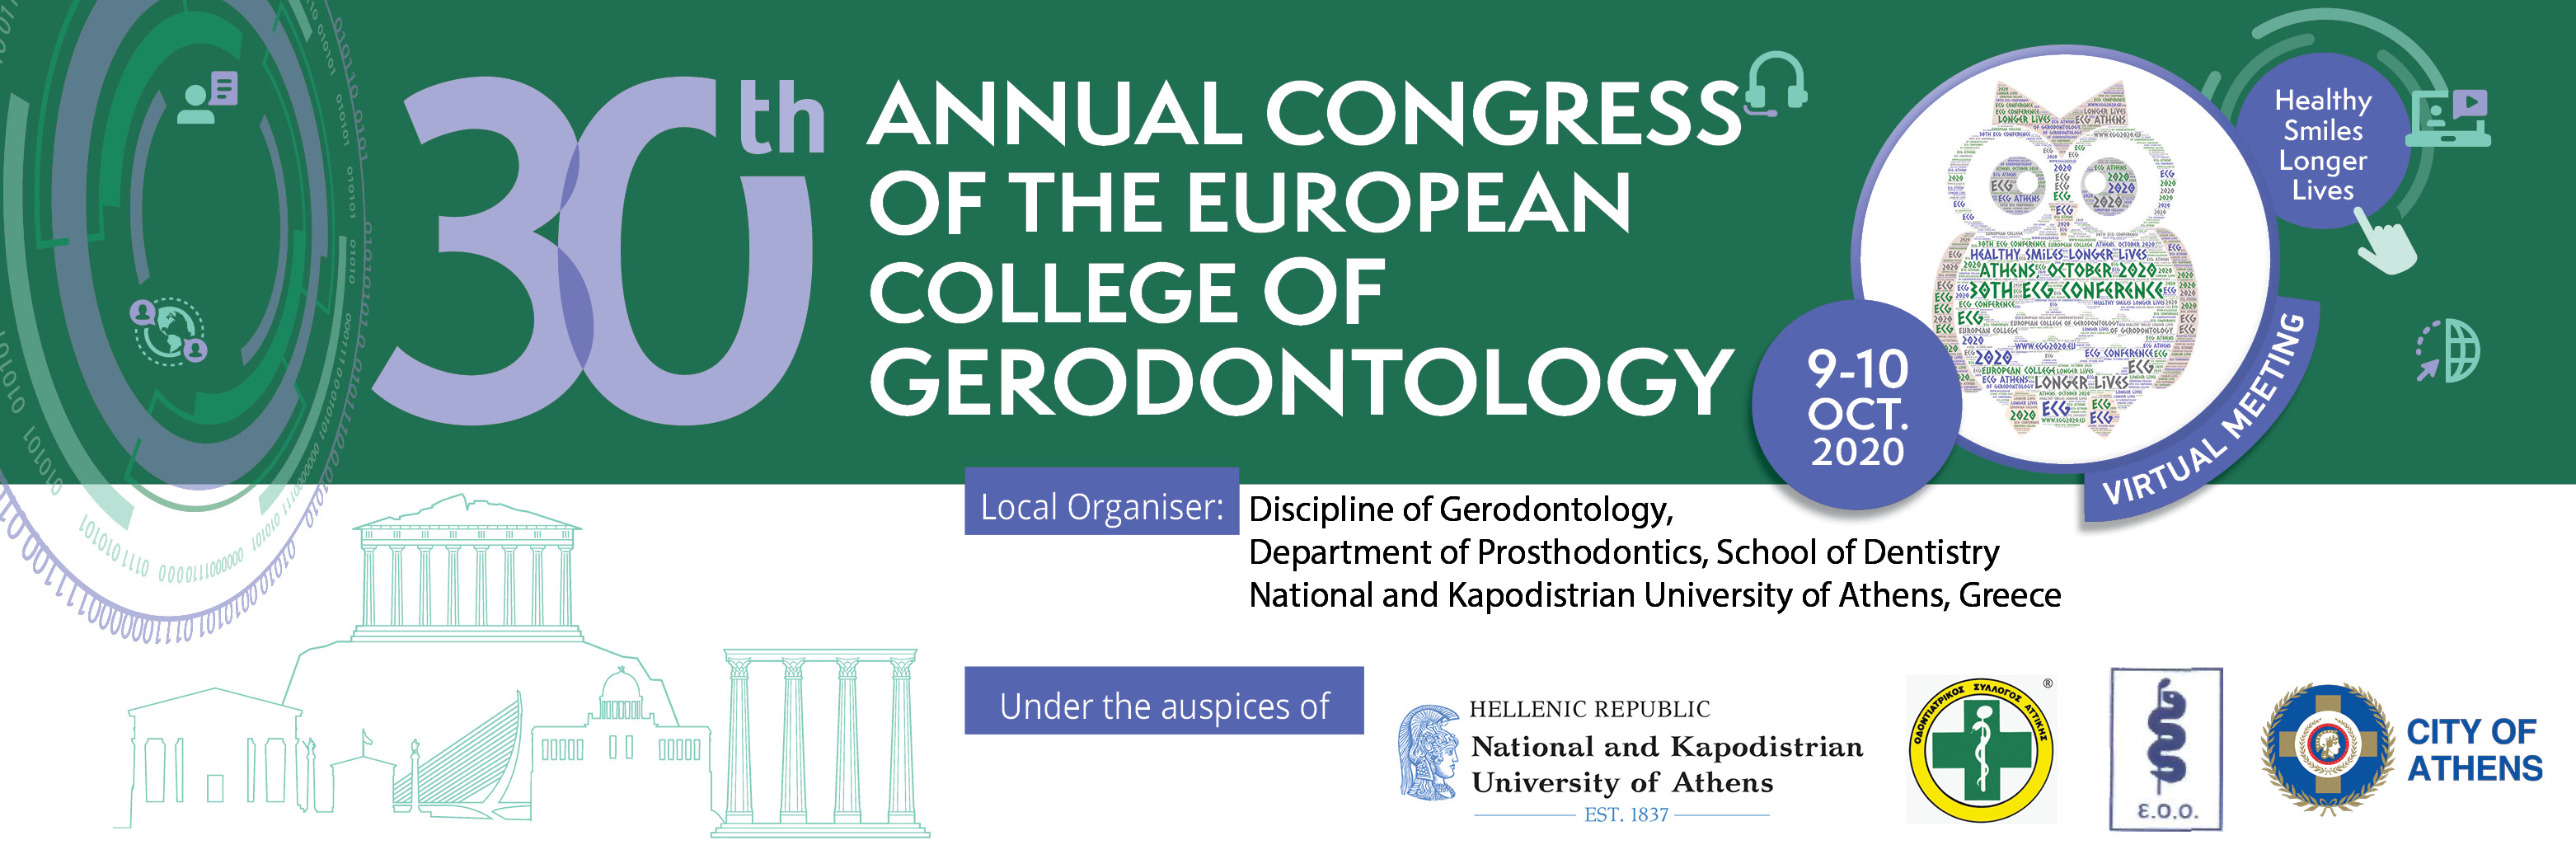 30th Annual Congress Of The European College Of Gerodontology